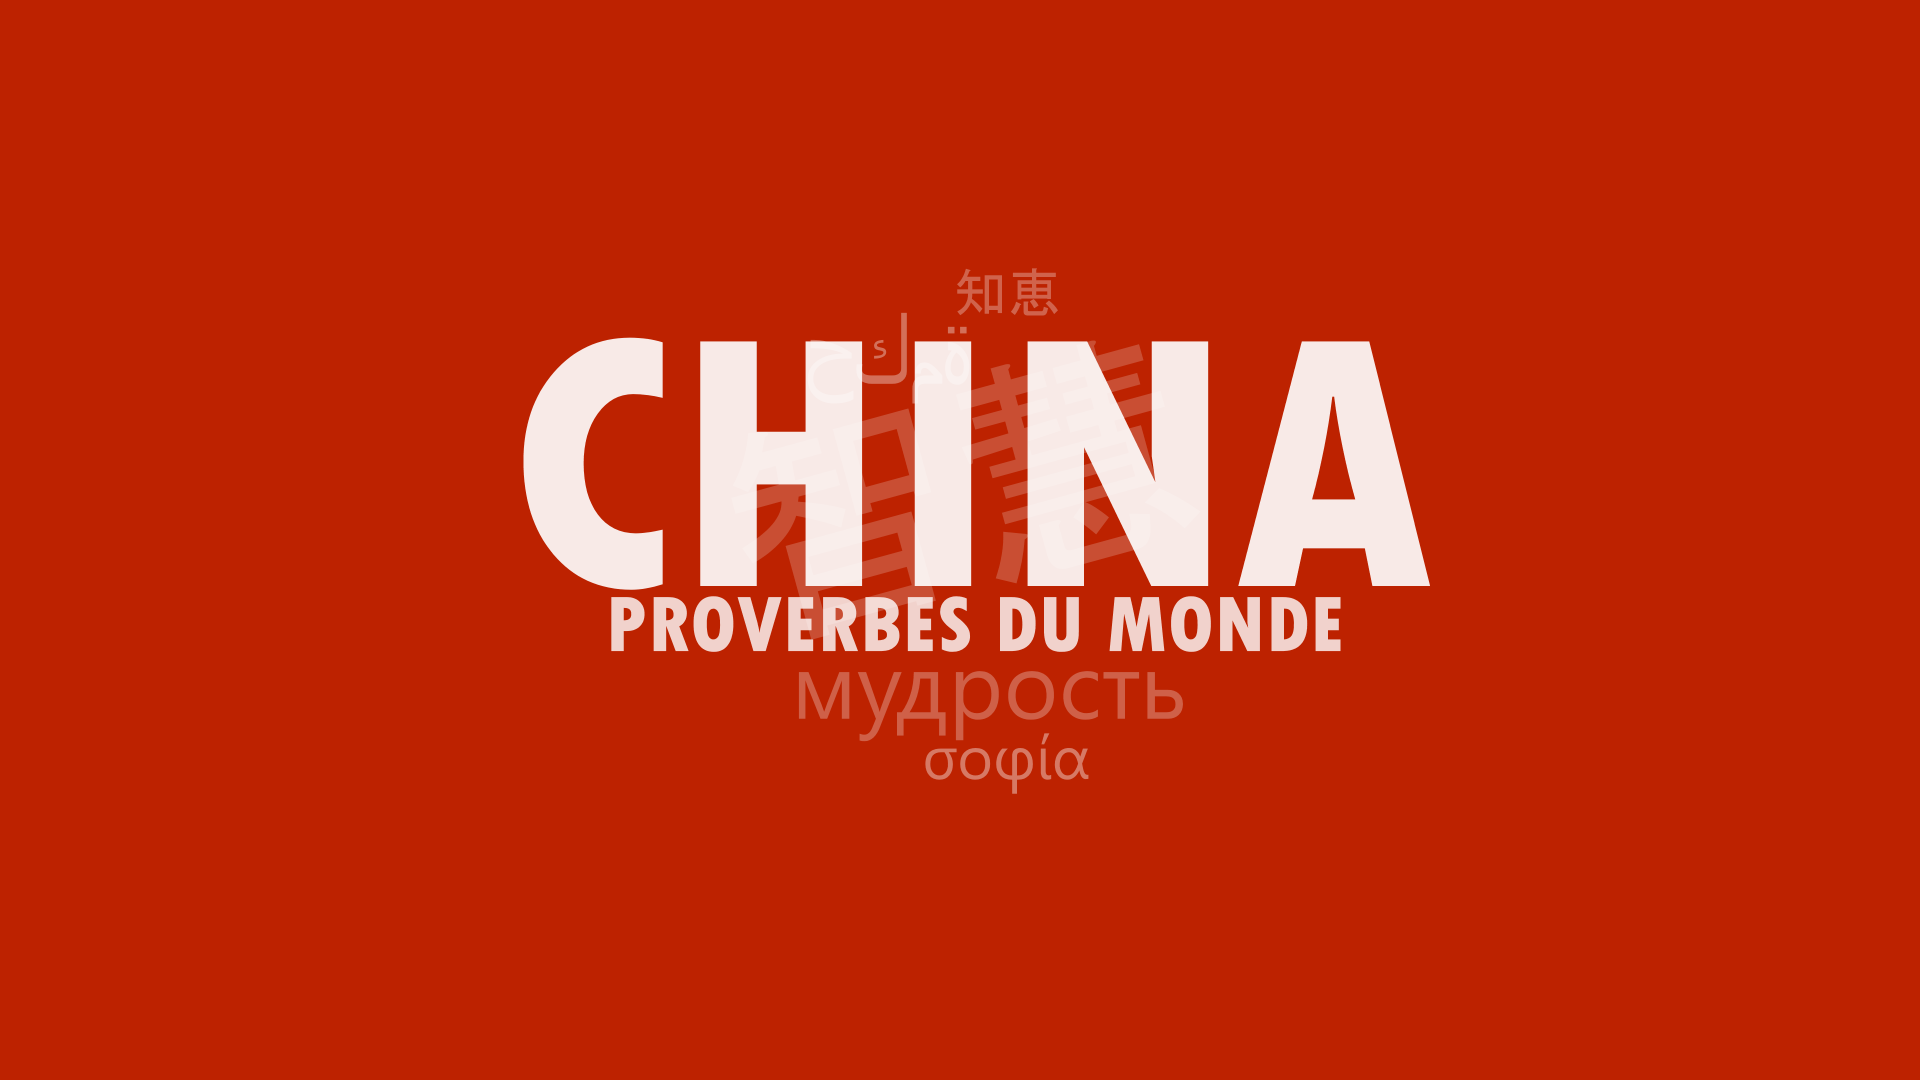 Hundred of hand-picked Chinese proverbs